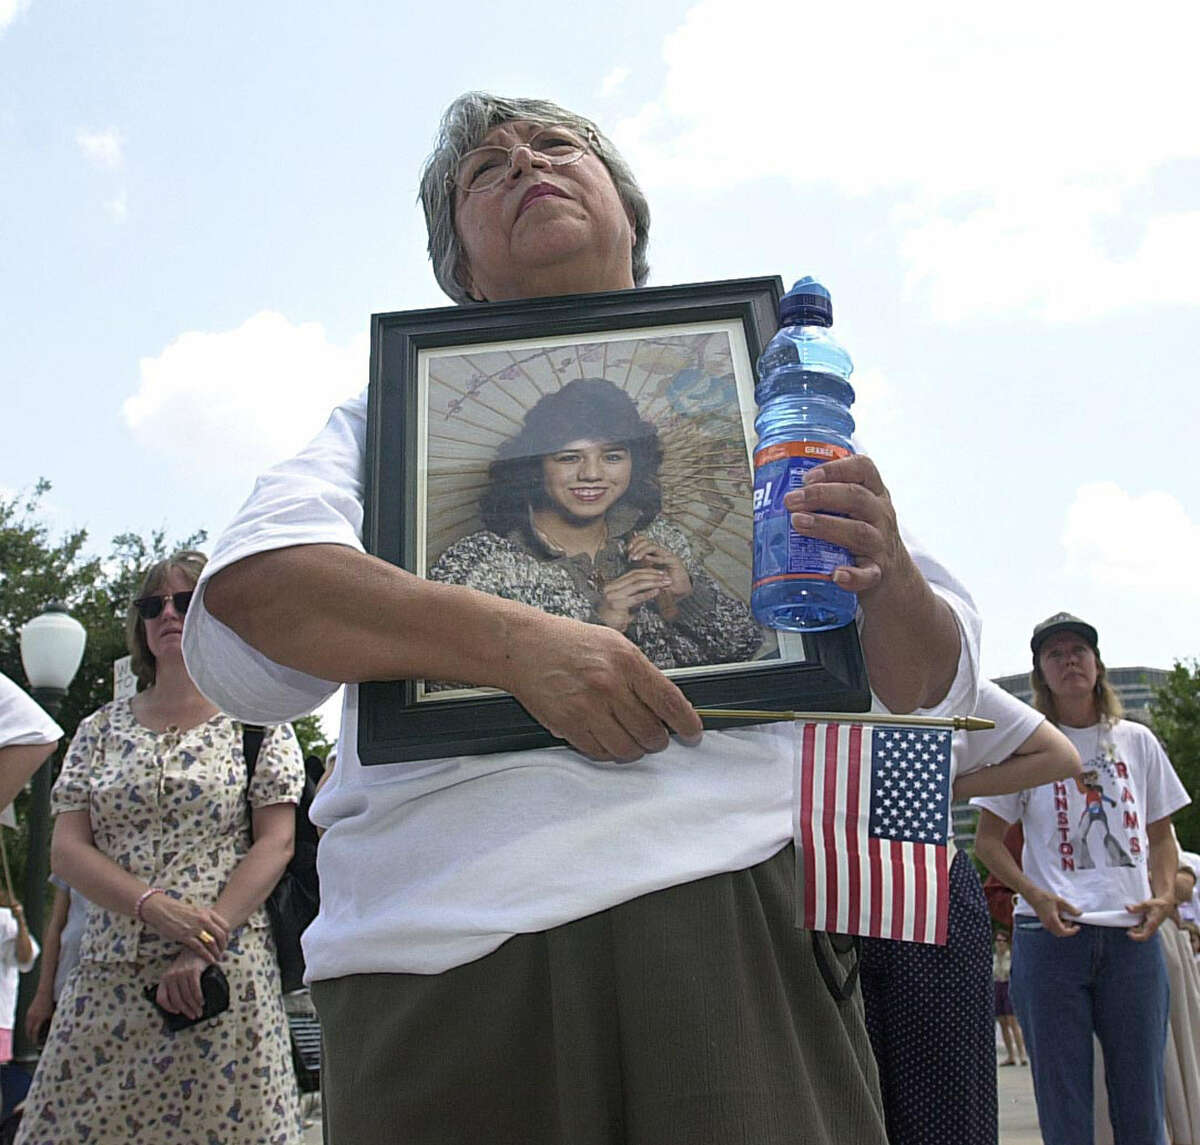 Margaret Espinoza, of San Antonio holds the image of her daughter Erica Espinoza, who was an innocent bystander in a drive-by-shooting in 1992, during the Million Mom March in Austin.